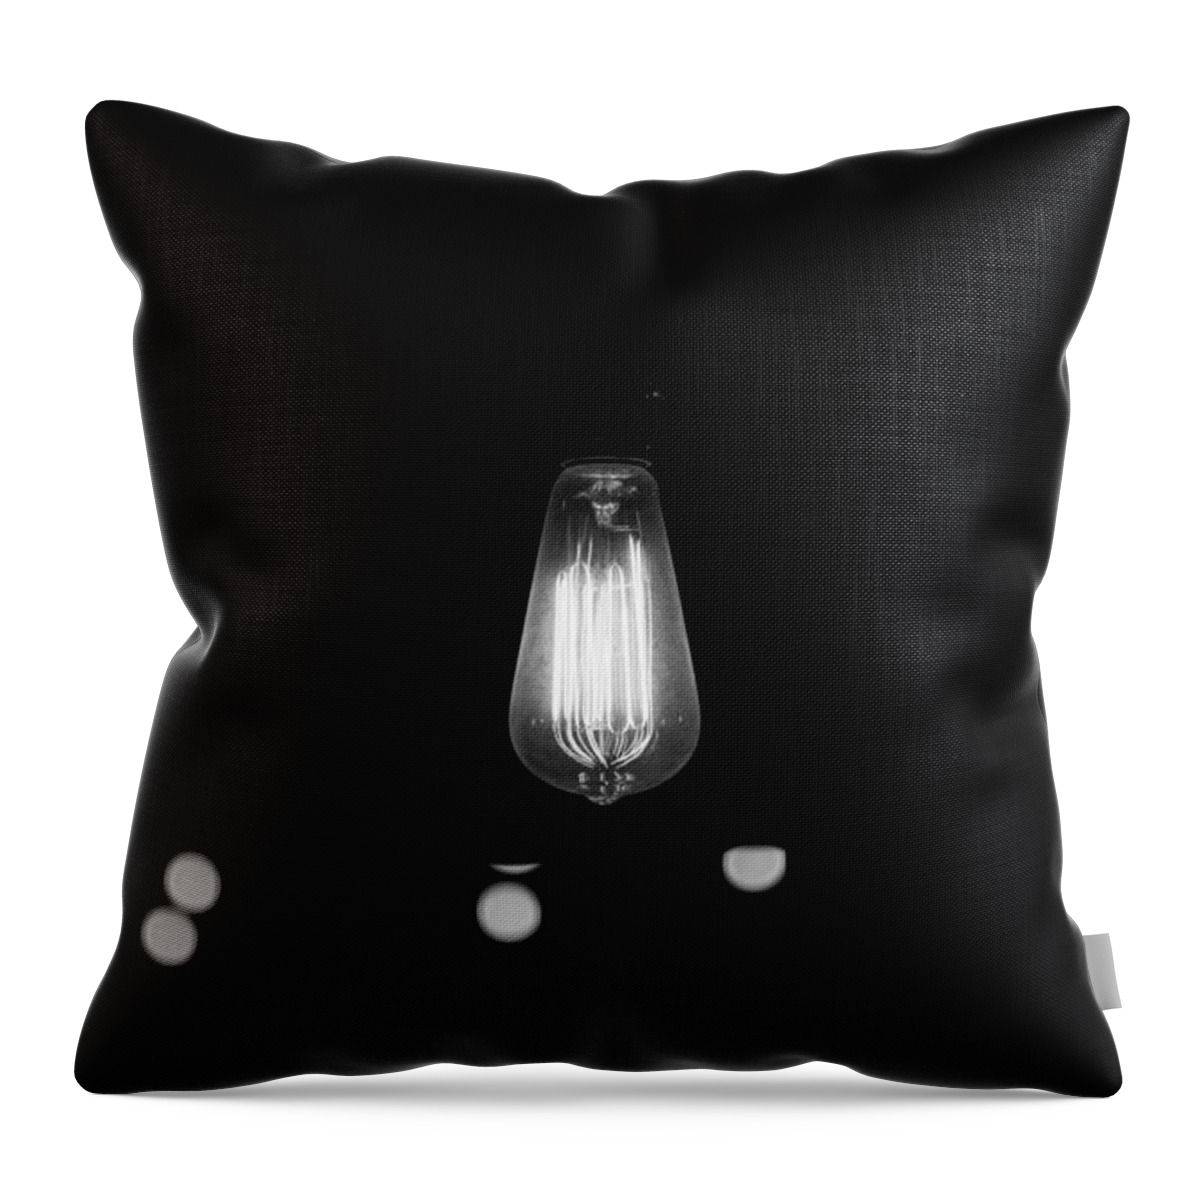 Bare Bulb Throw Pillow featuring the photograph Bare Bulb by Allan Morrison